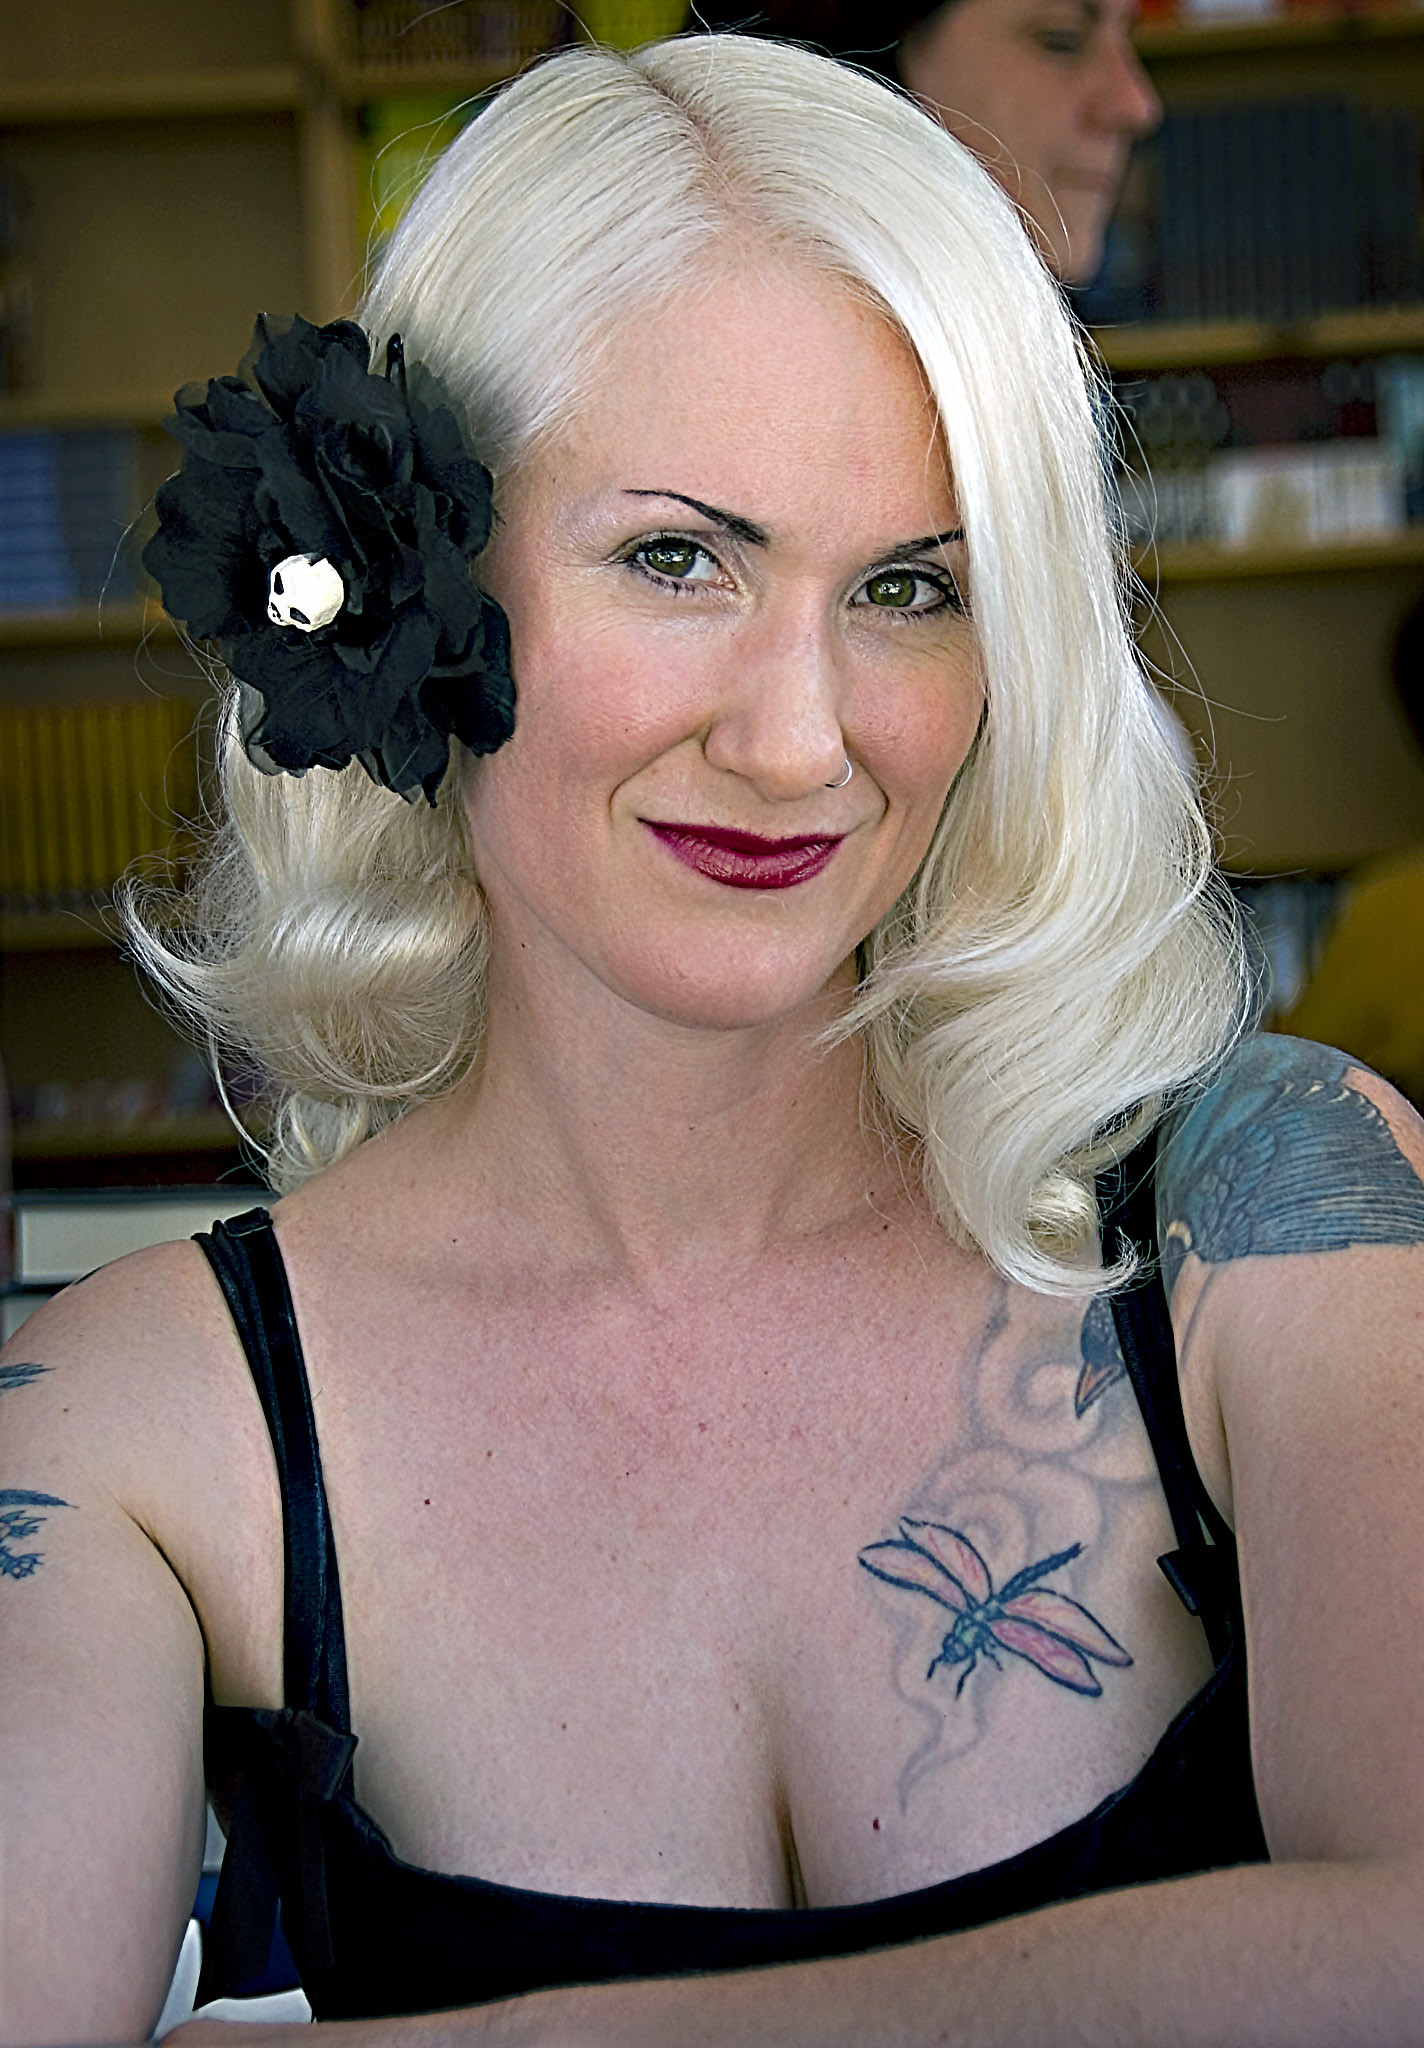 Author Christa Faust signing at a booth at the LA Times Festival of Books. She has a black hair barrette that looks like a flower with a tiny skull in the middle and she is wearing a black strappy dress that shows off several of her tattoos.